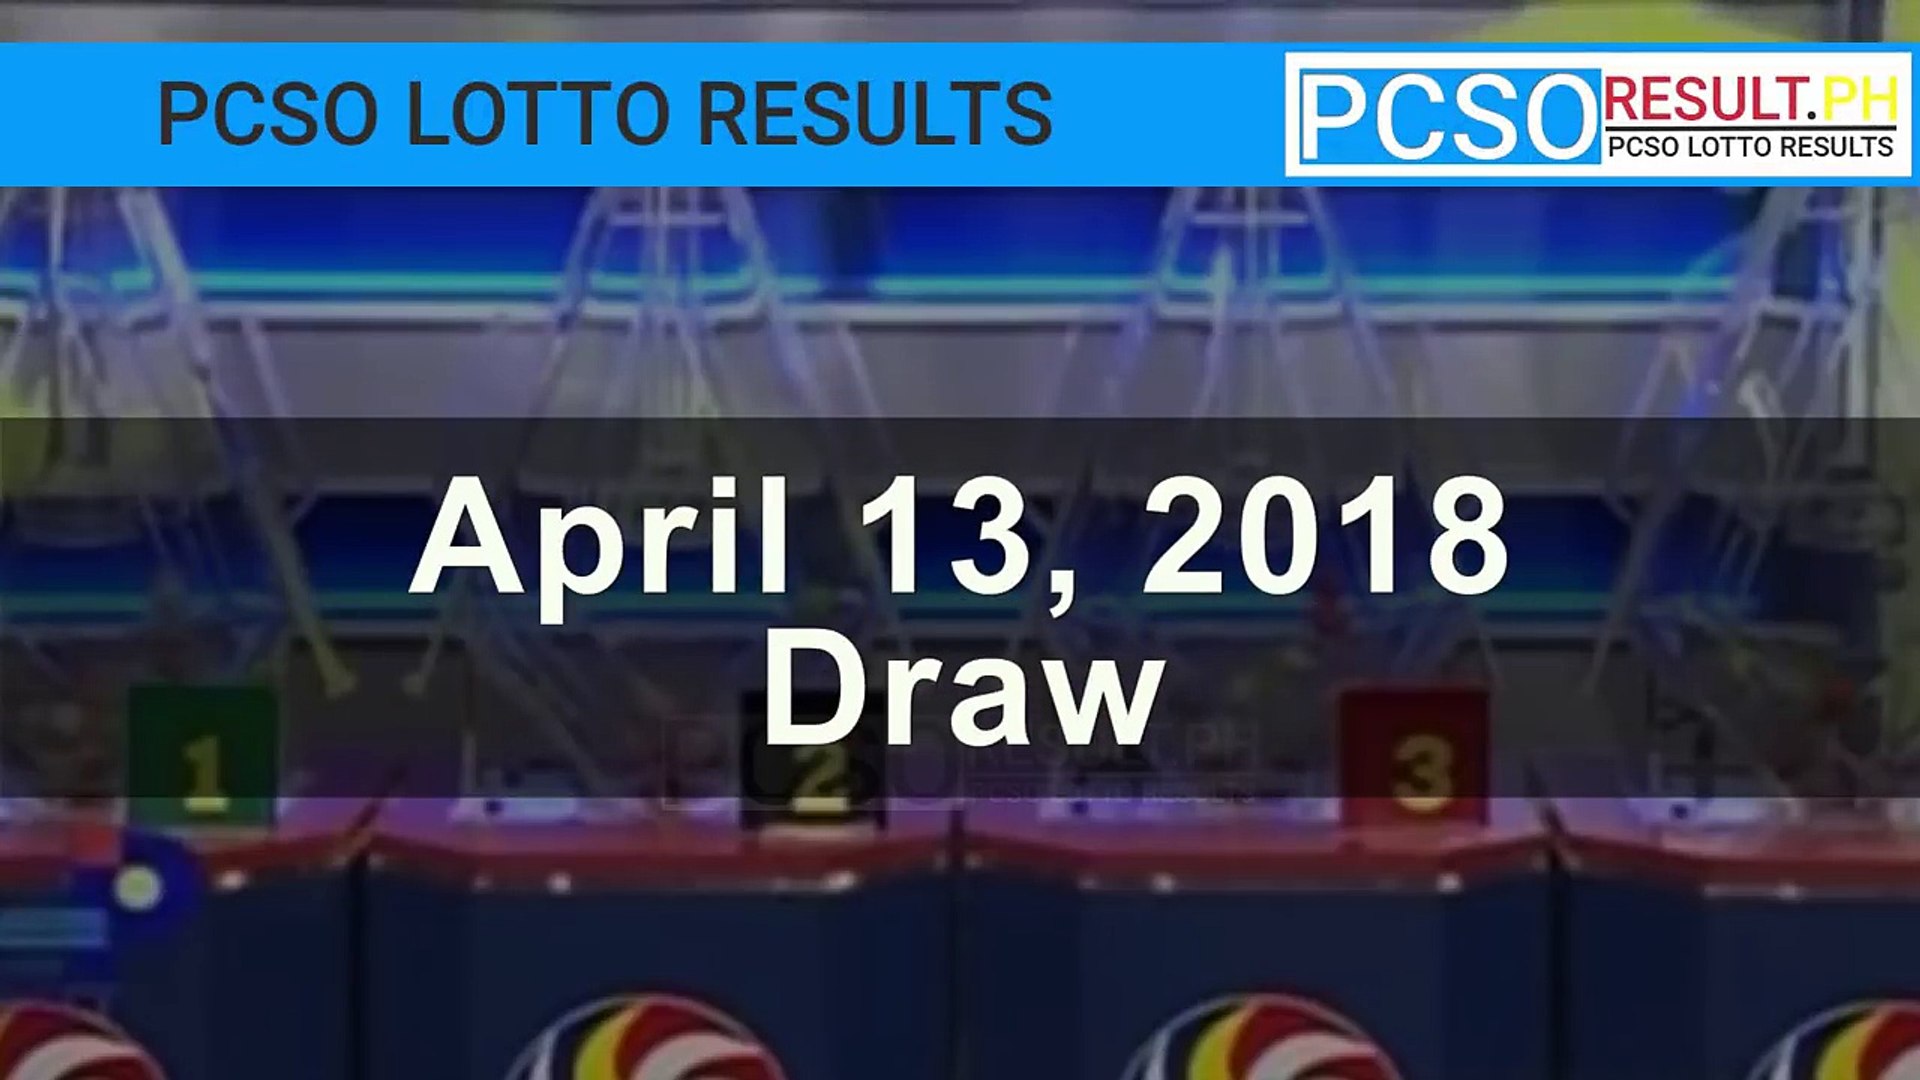 latest phil lotto results